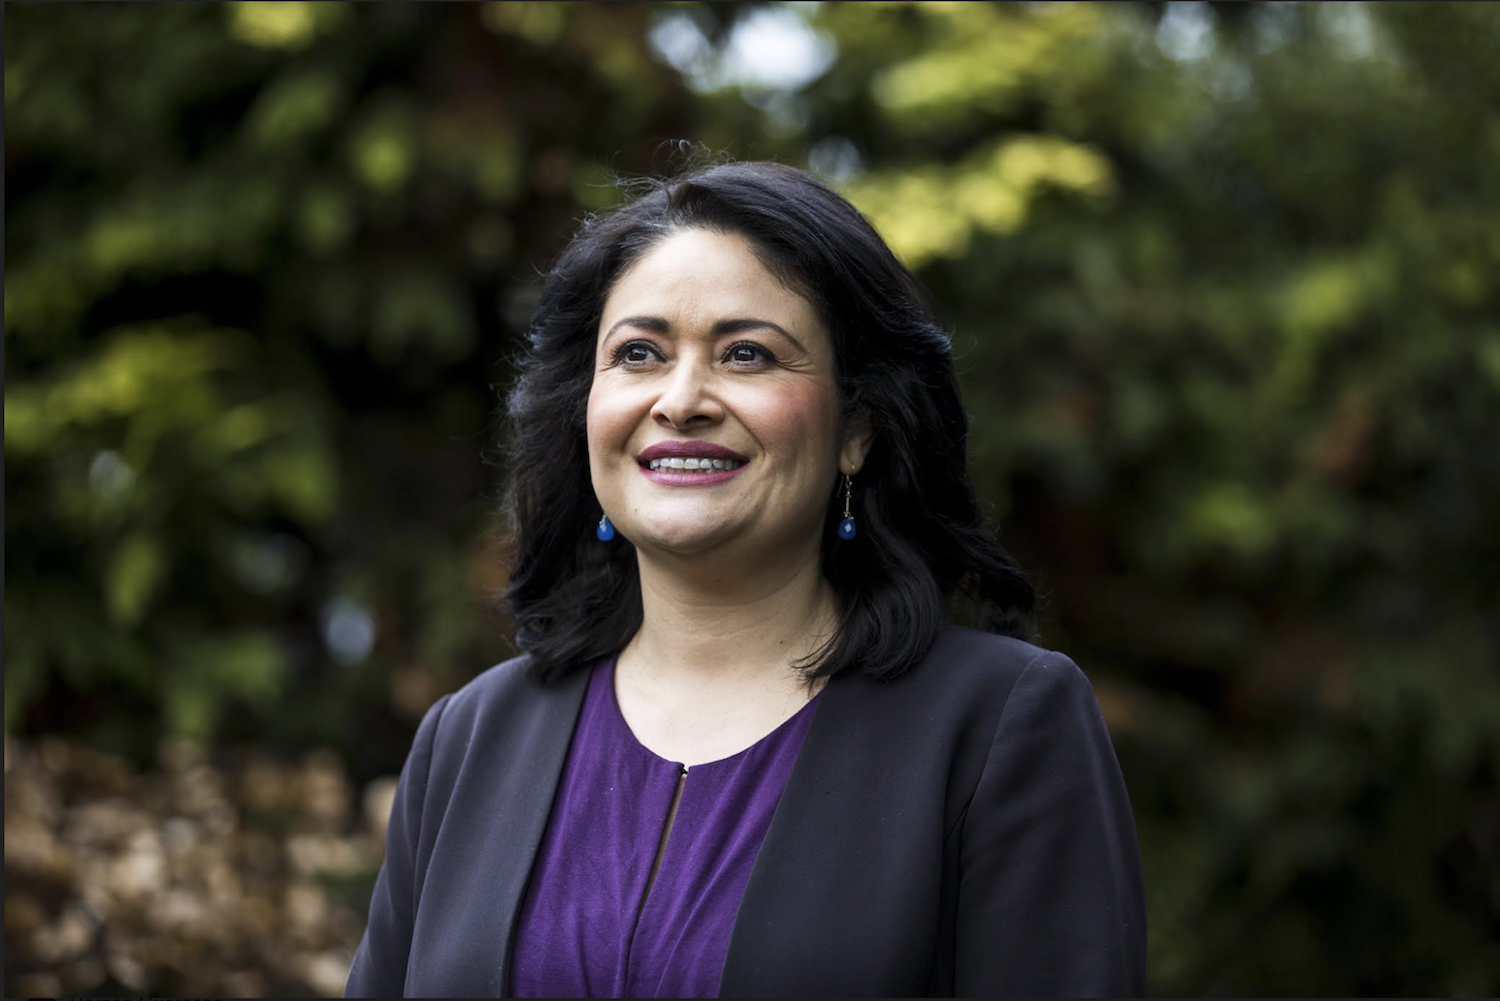 Photo: City Council President M. Lorena González has the endorsement of U.S. Rep. Pramila Jayapal in the race for Seattle mayor. Courtesy: Amanda Snyder/The Seattle Times